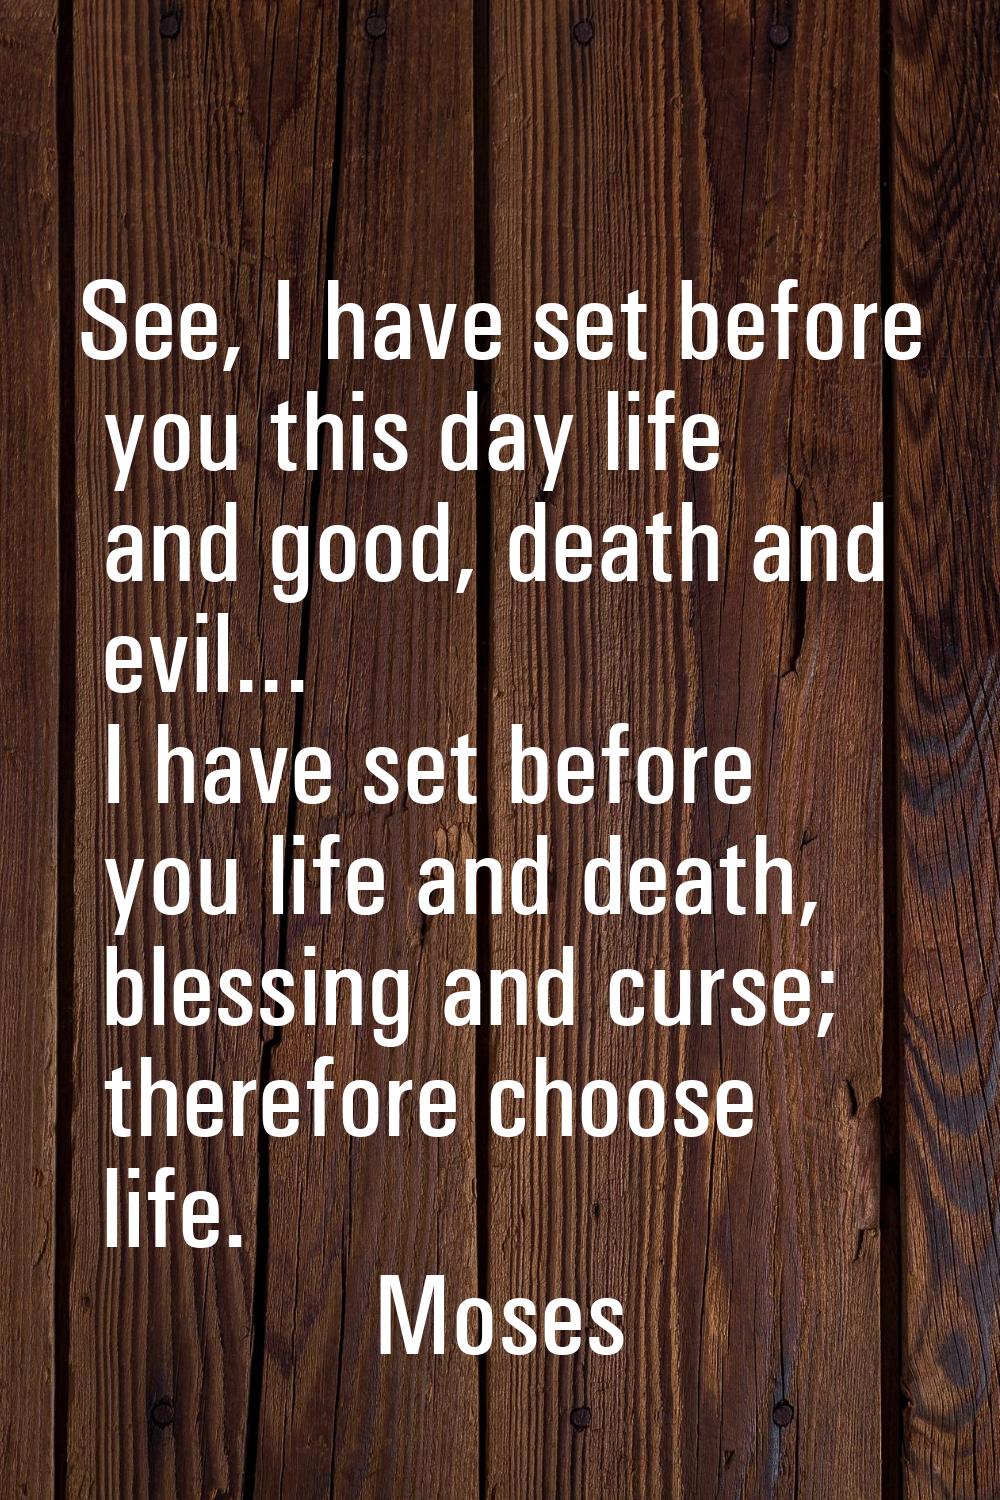 See, I have set before you this day life and good, death and evil... I have set before you life and